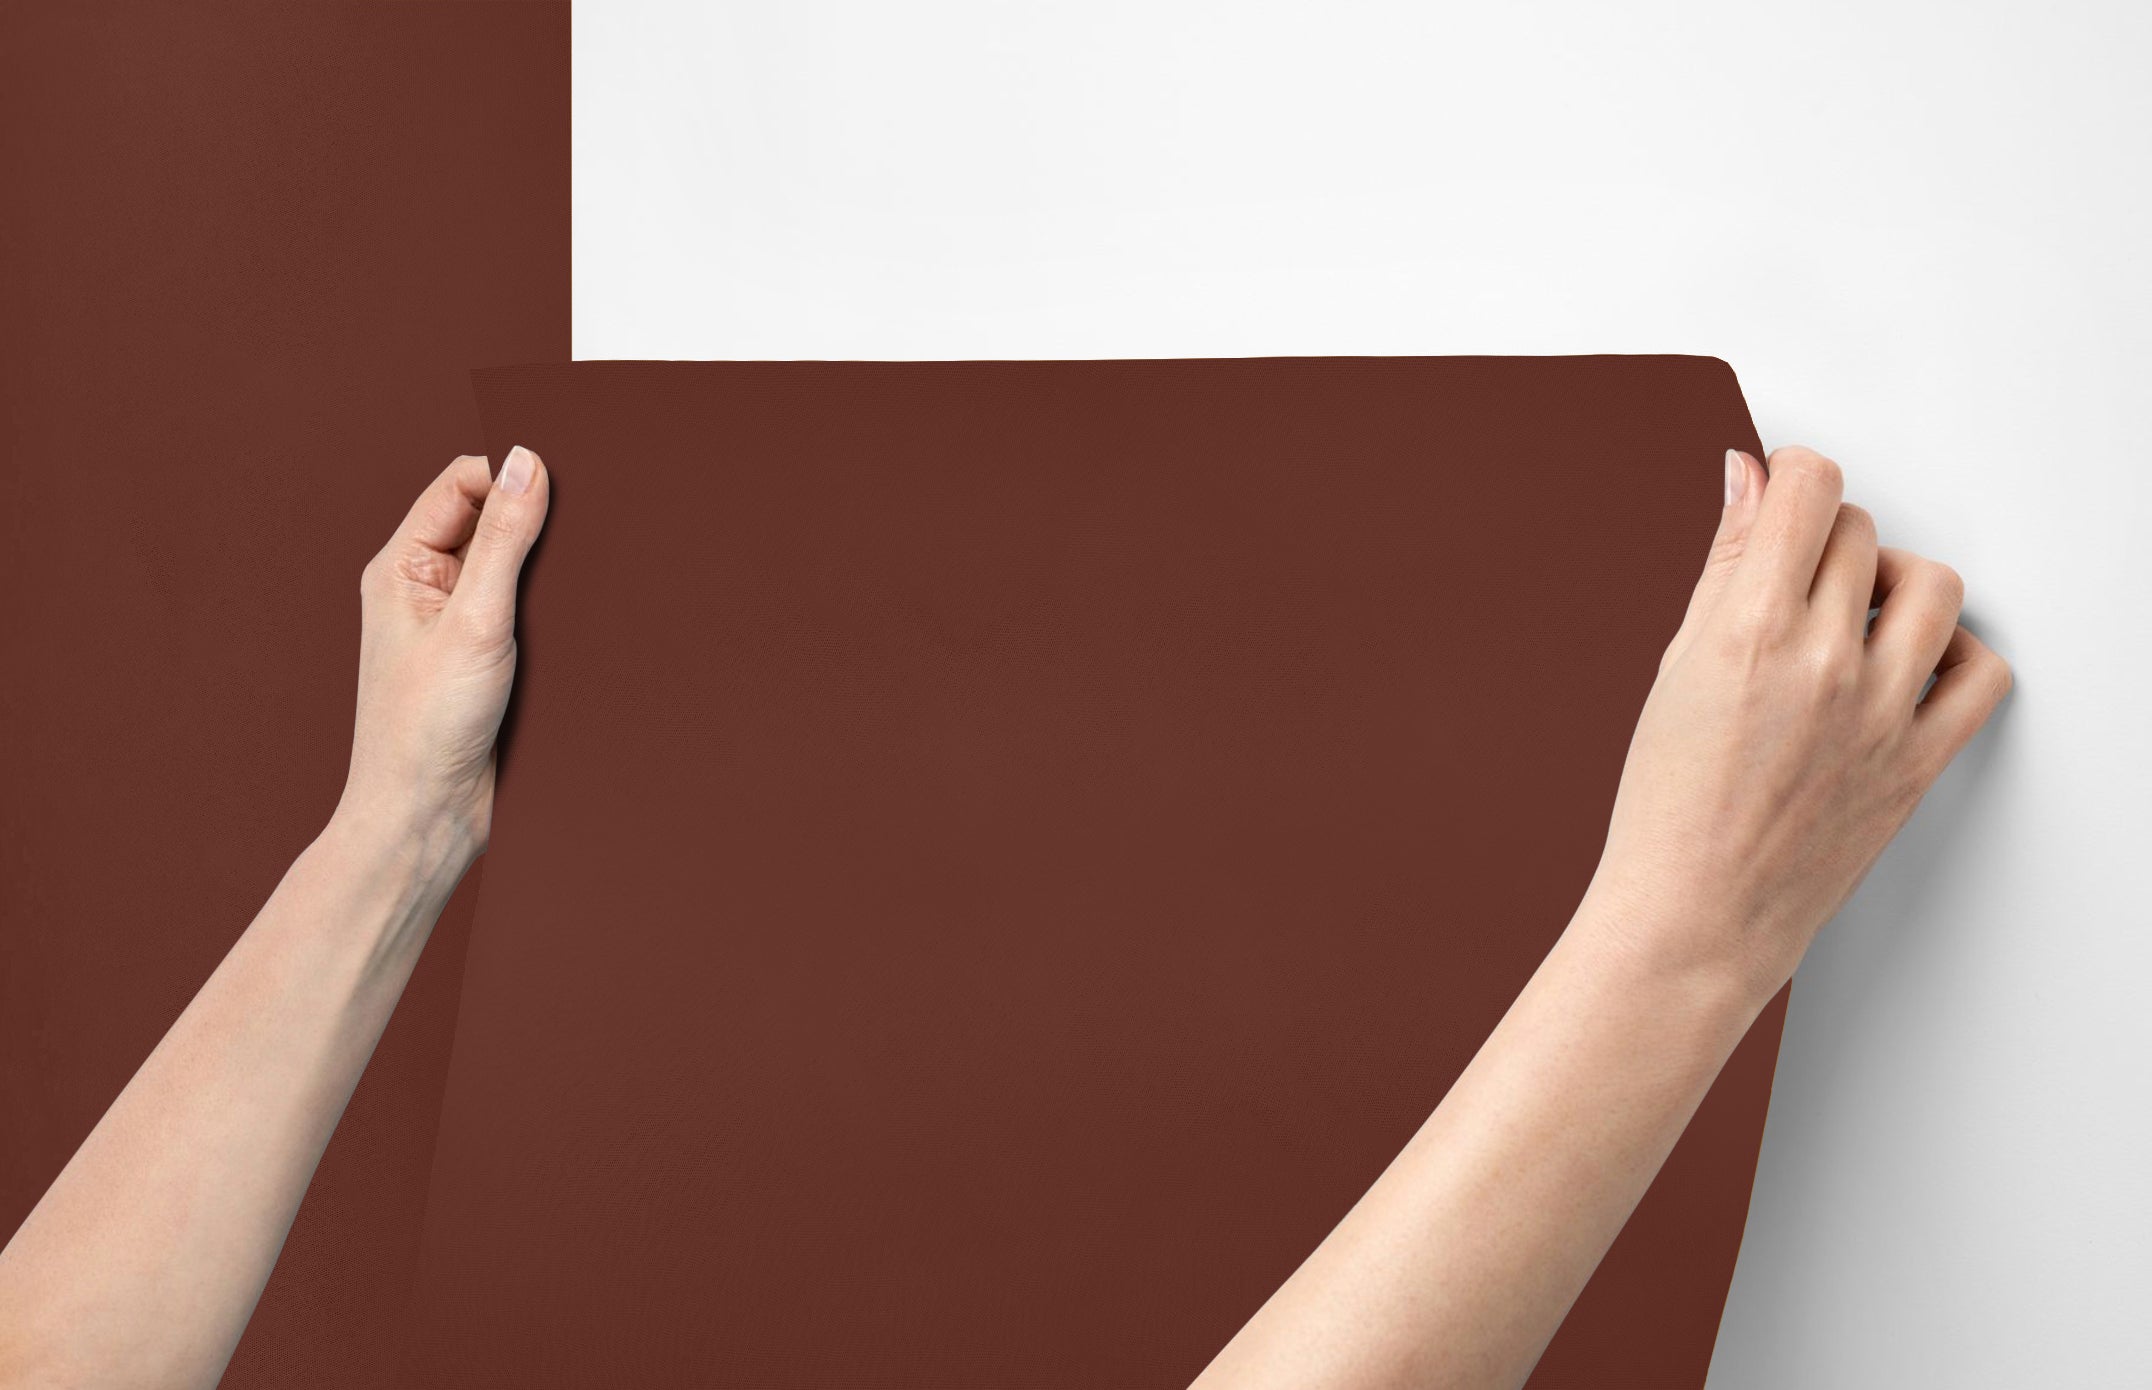 Peel & Stick Removable Re-usable Paint - Color RAL 8012 Red Brown - offRAL™ - RALRAW LLC, USA